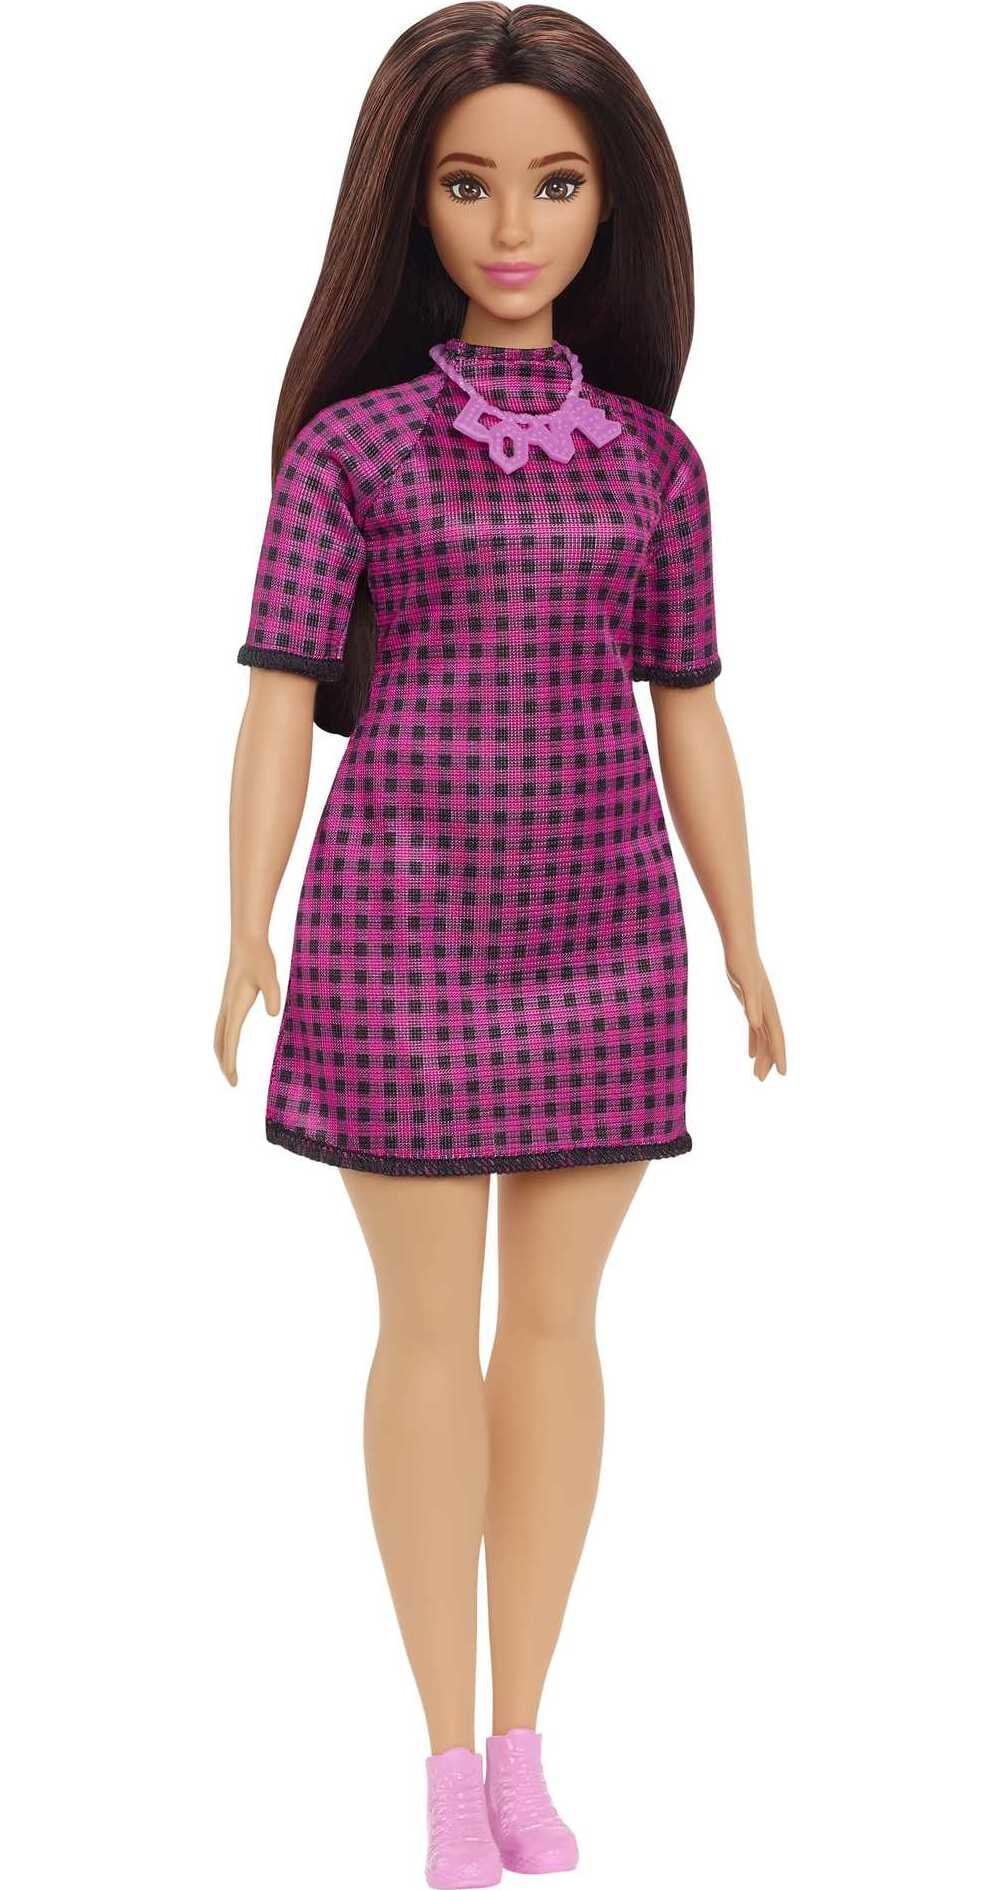 Barbie Fashionistas Doll #188 in Checkered Dress with Curvy Shape ...